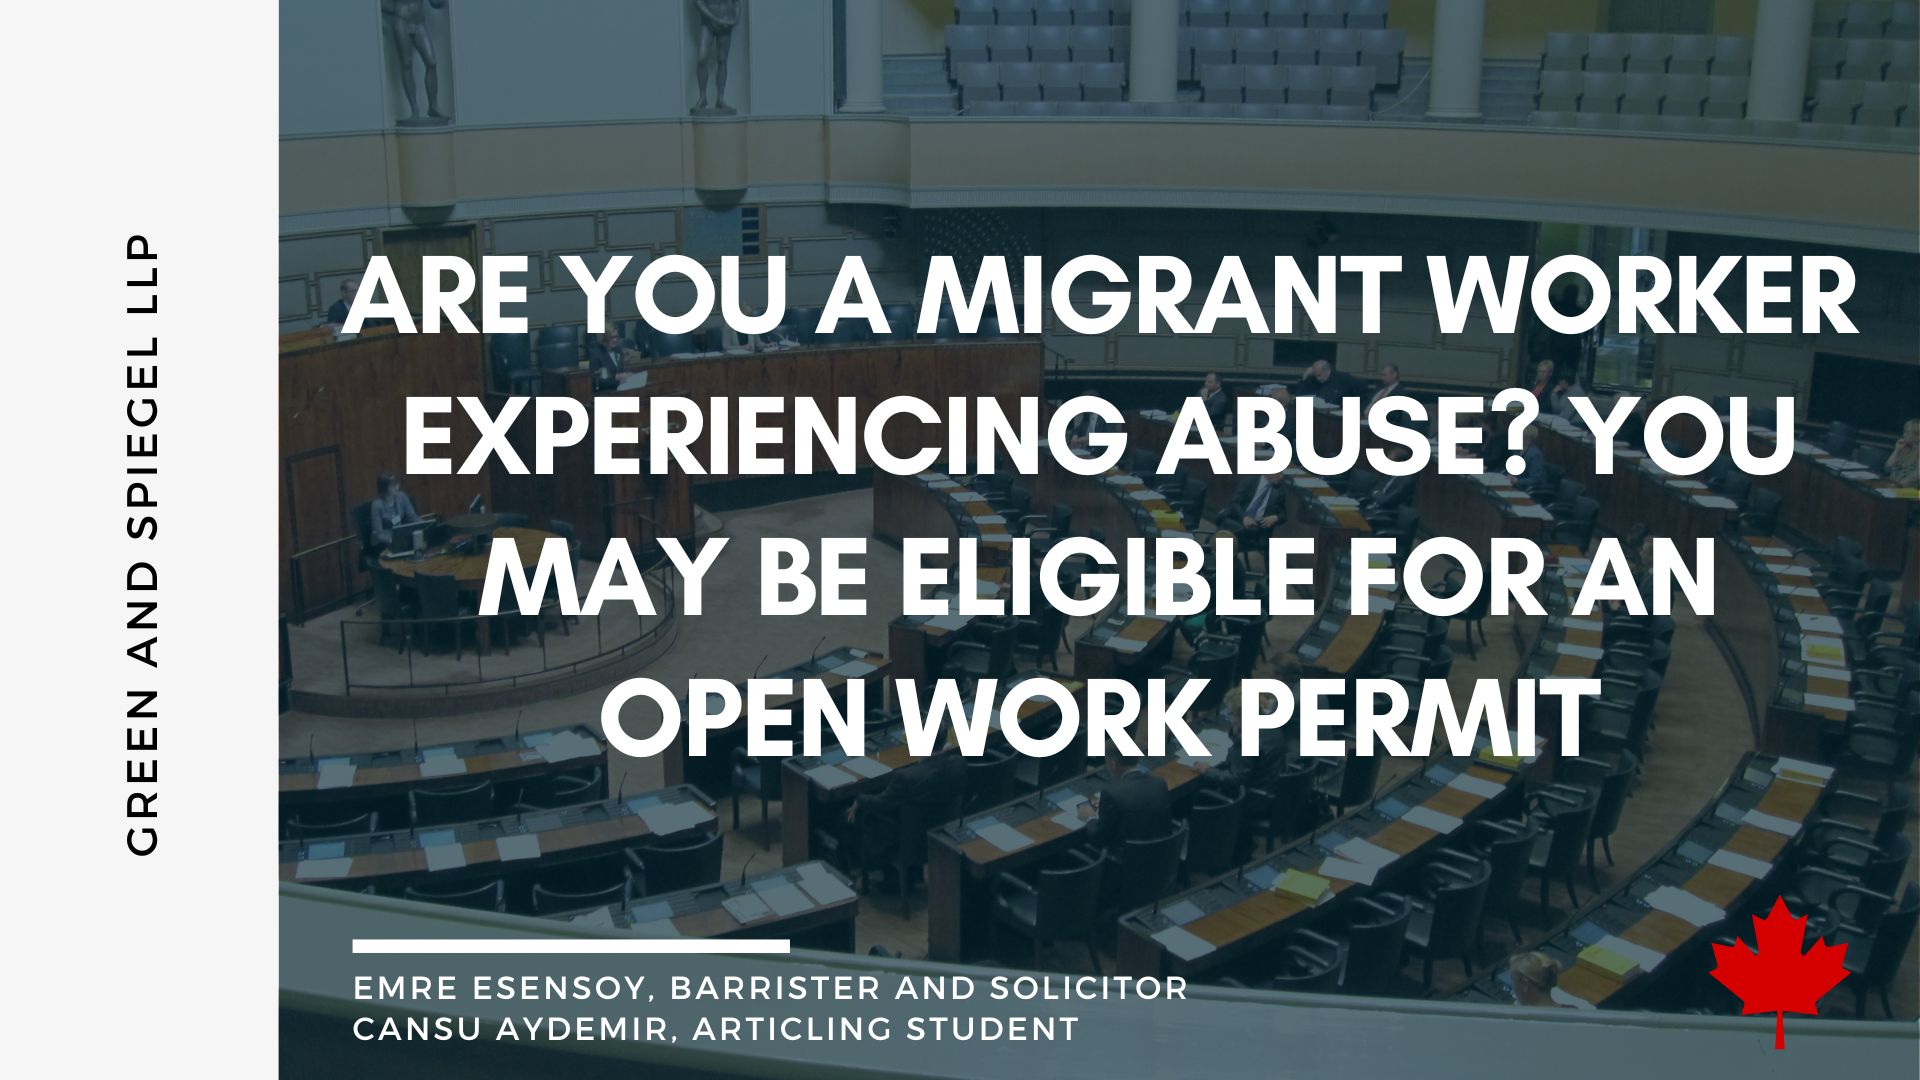 ARE YOU A MIGRANT WORKER EXPERIENCING ABUSE? YOU MAY BE ELIGIBLE FOR AN OPEN WORK PERMIT